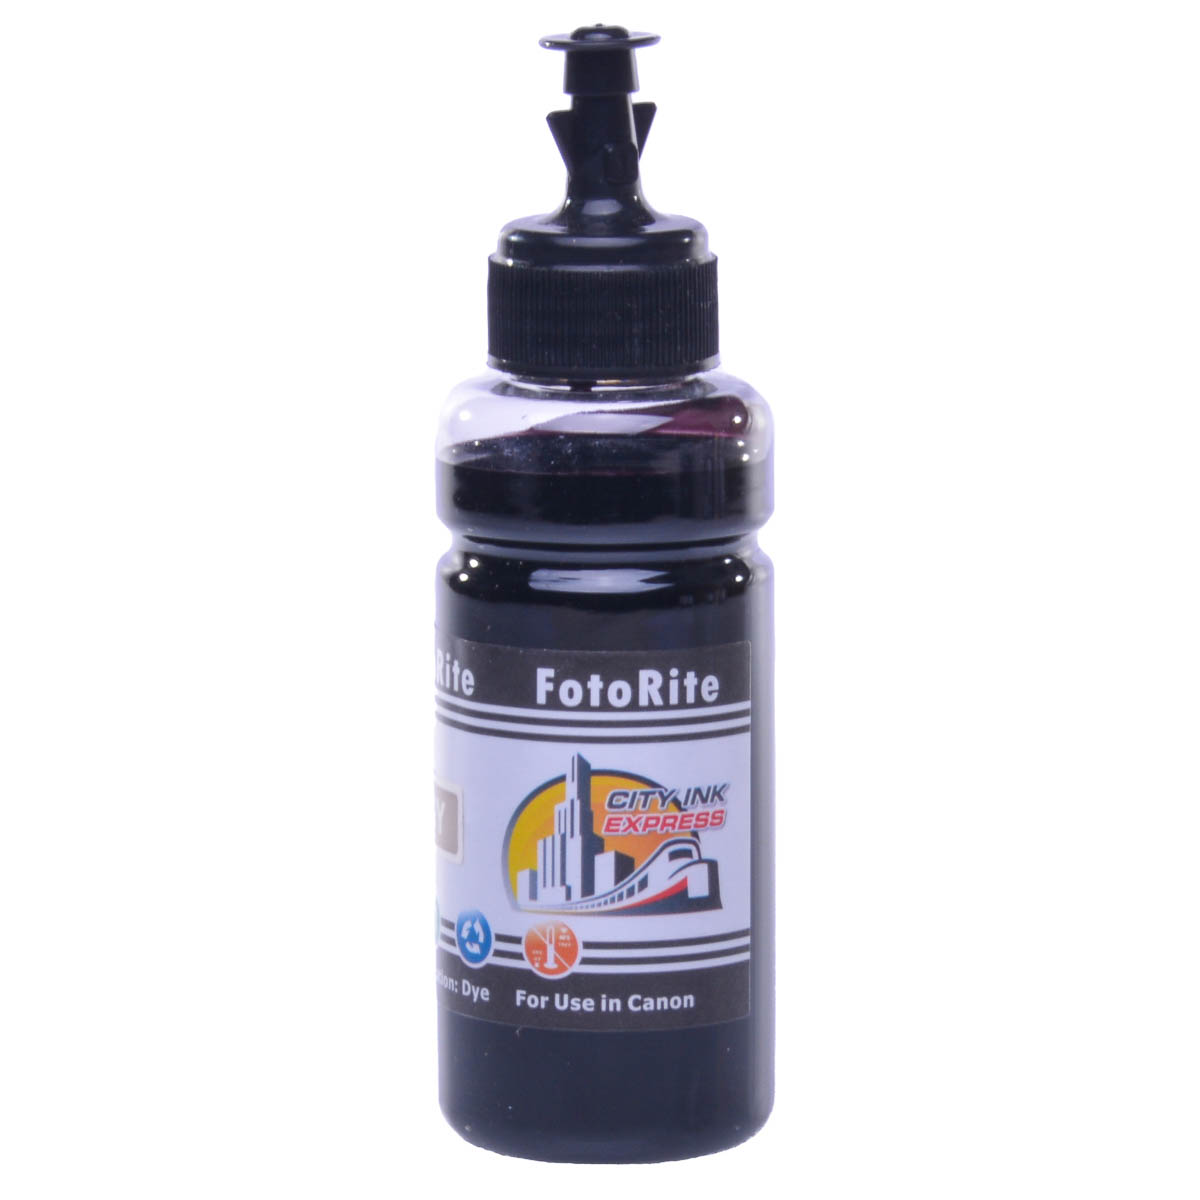 Cheap Grey dye ink replaces Canon Pixma IP8750 - CLI-551GY